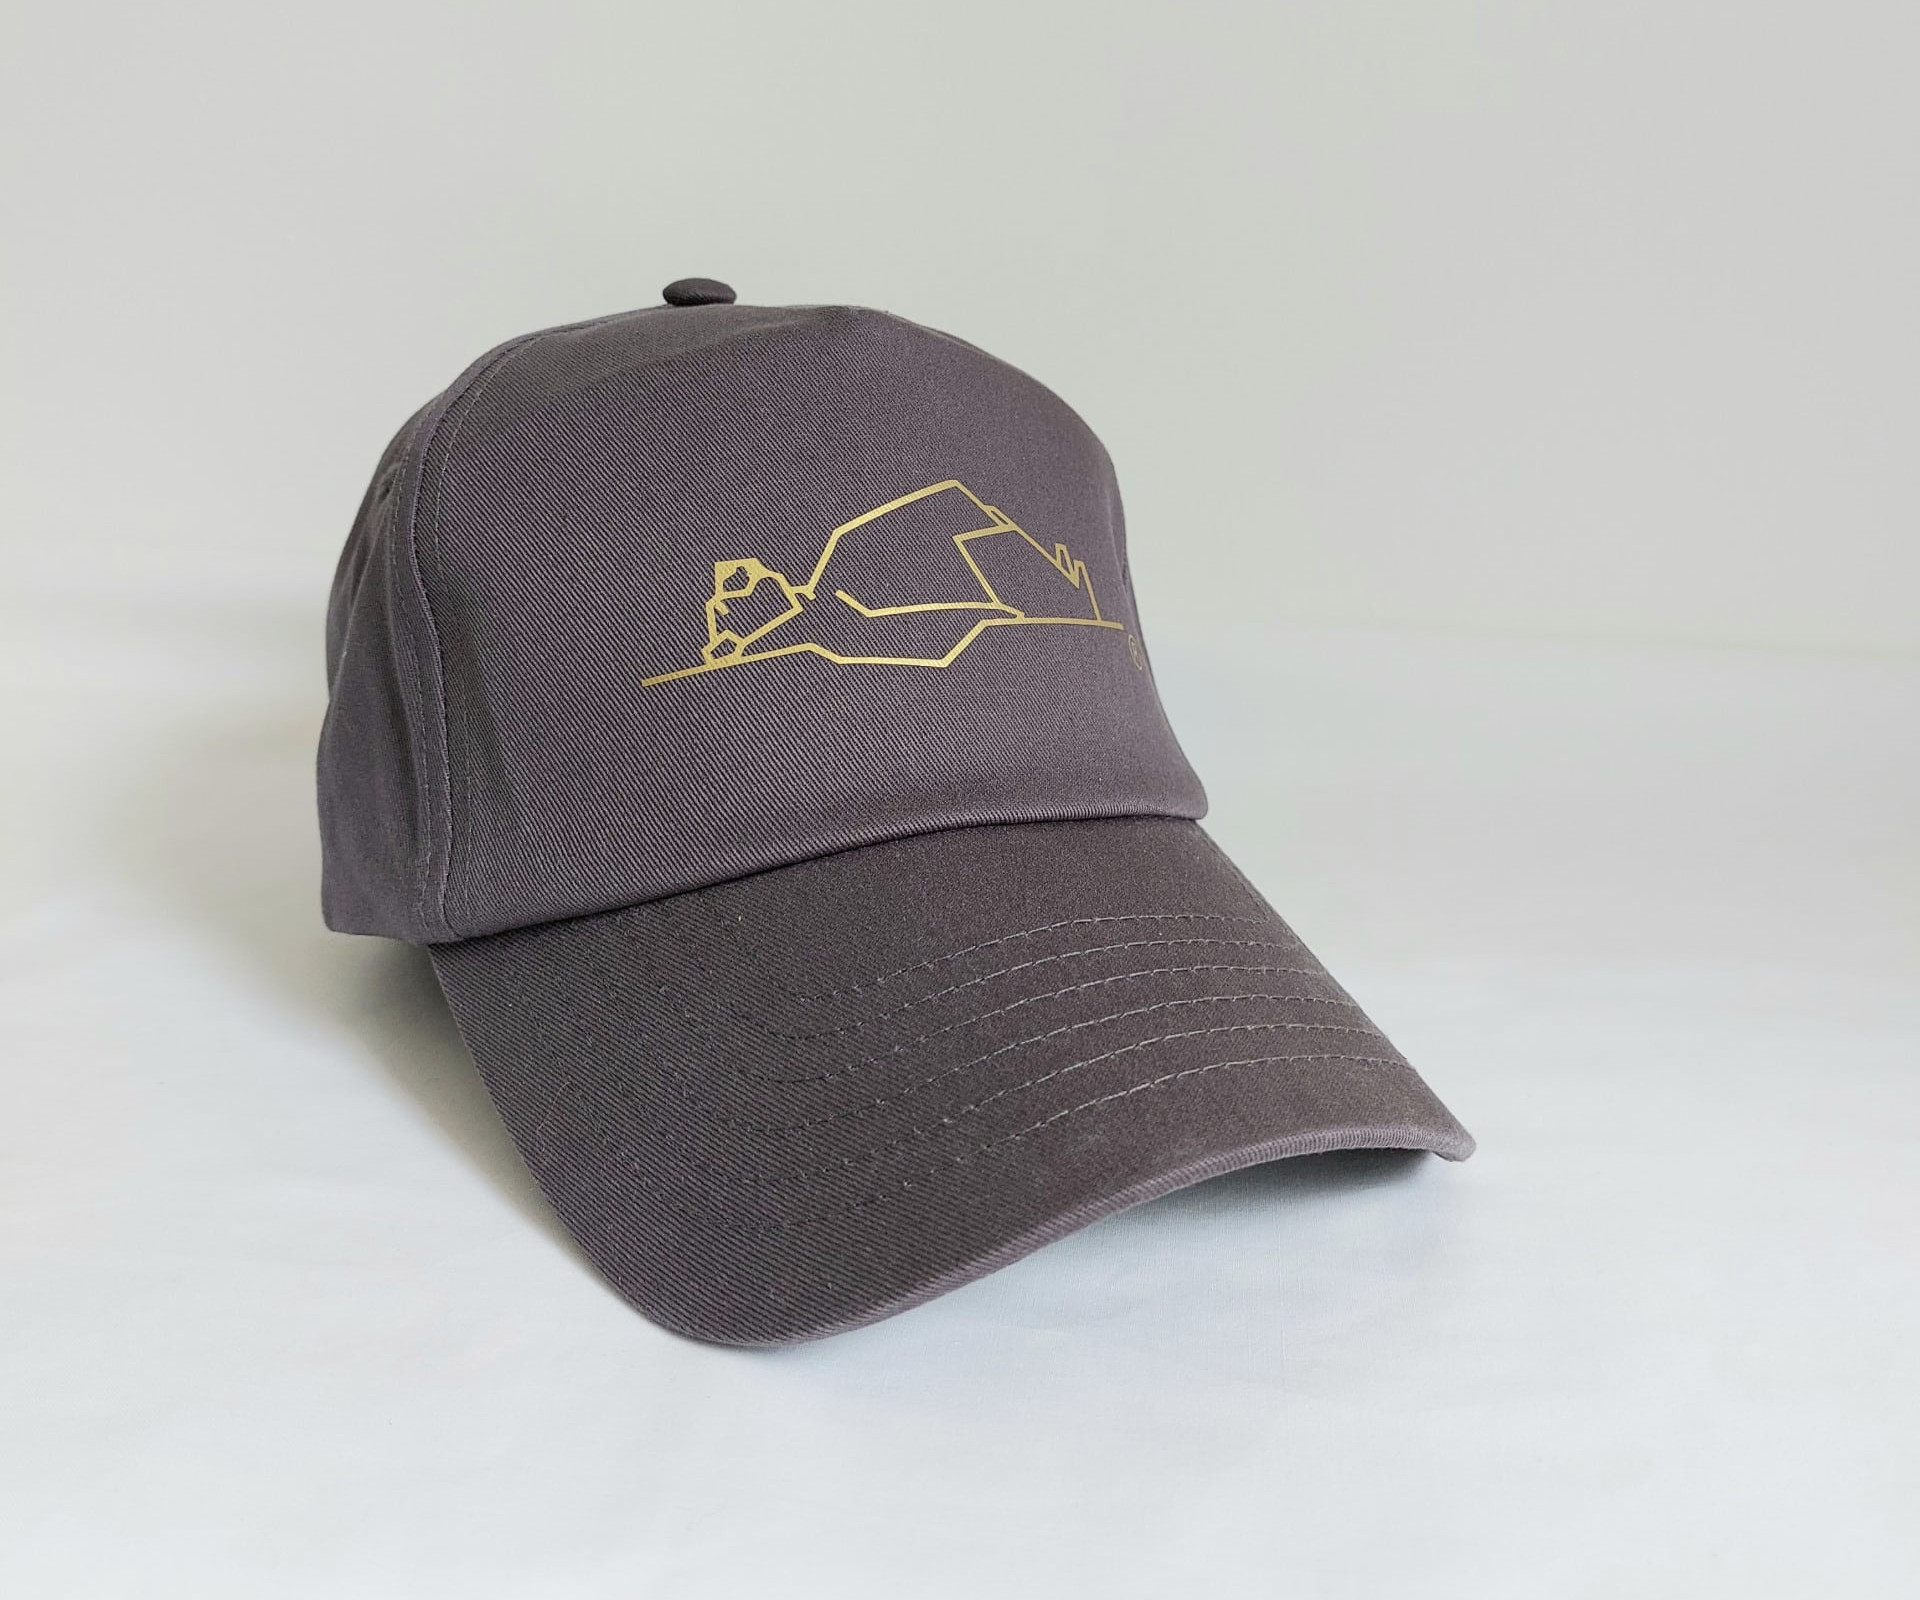 Angled side view of LayBakPak cap showing relaxing bear from logo